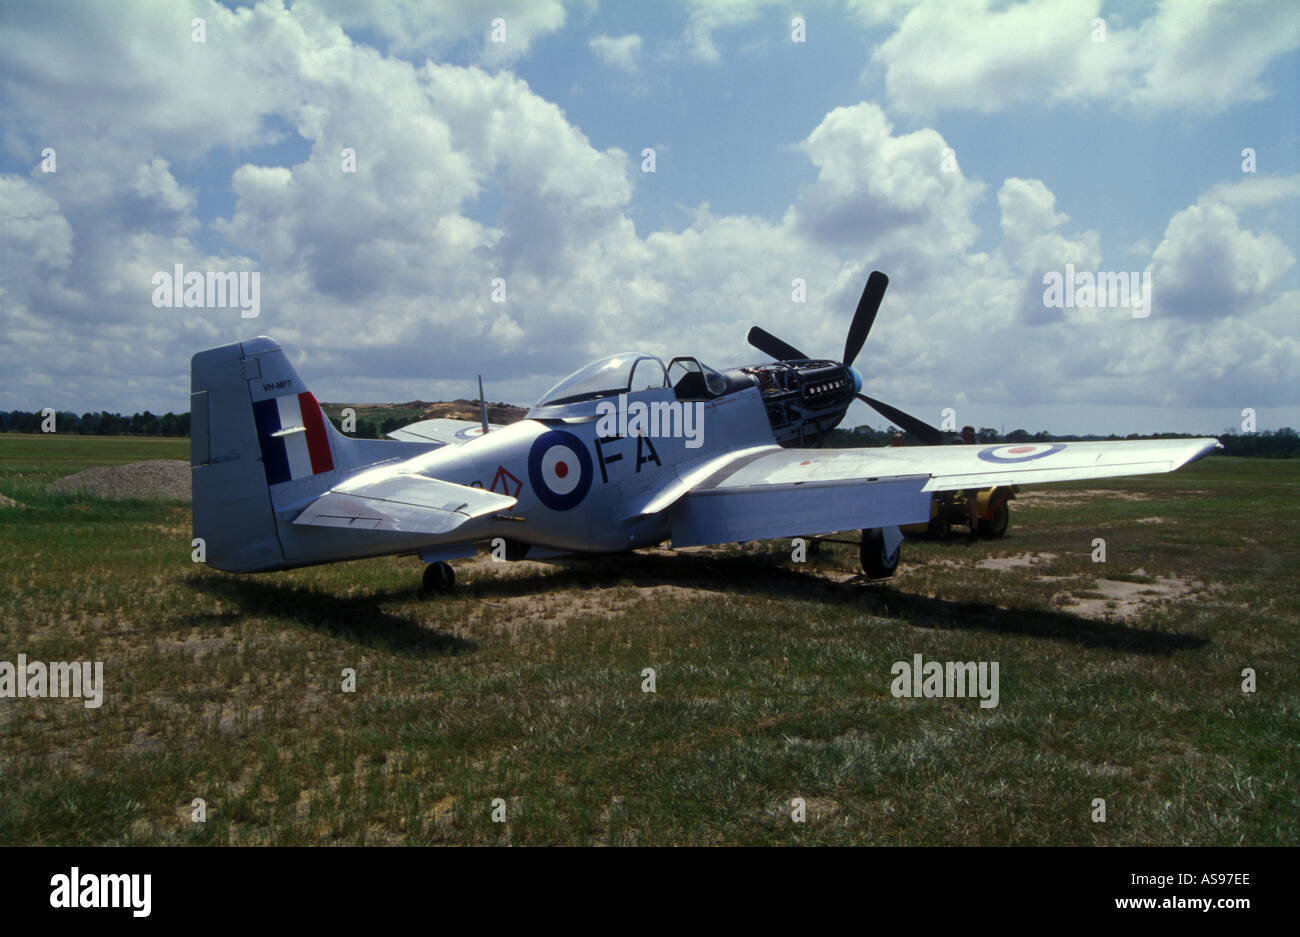 P51 Mustang being repaired at Caboolture Airfield Queensland Australia Merlin V12 motor RAAF Royal Australian Air Force marking Stock Photo